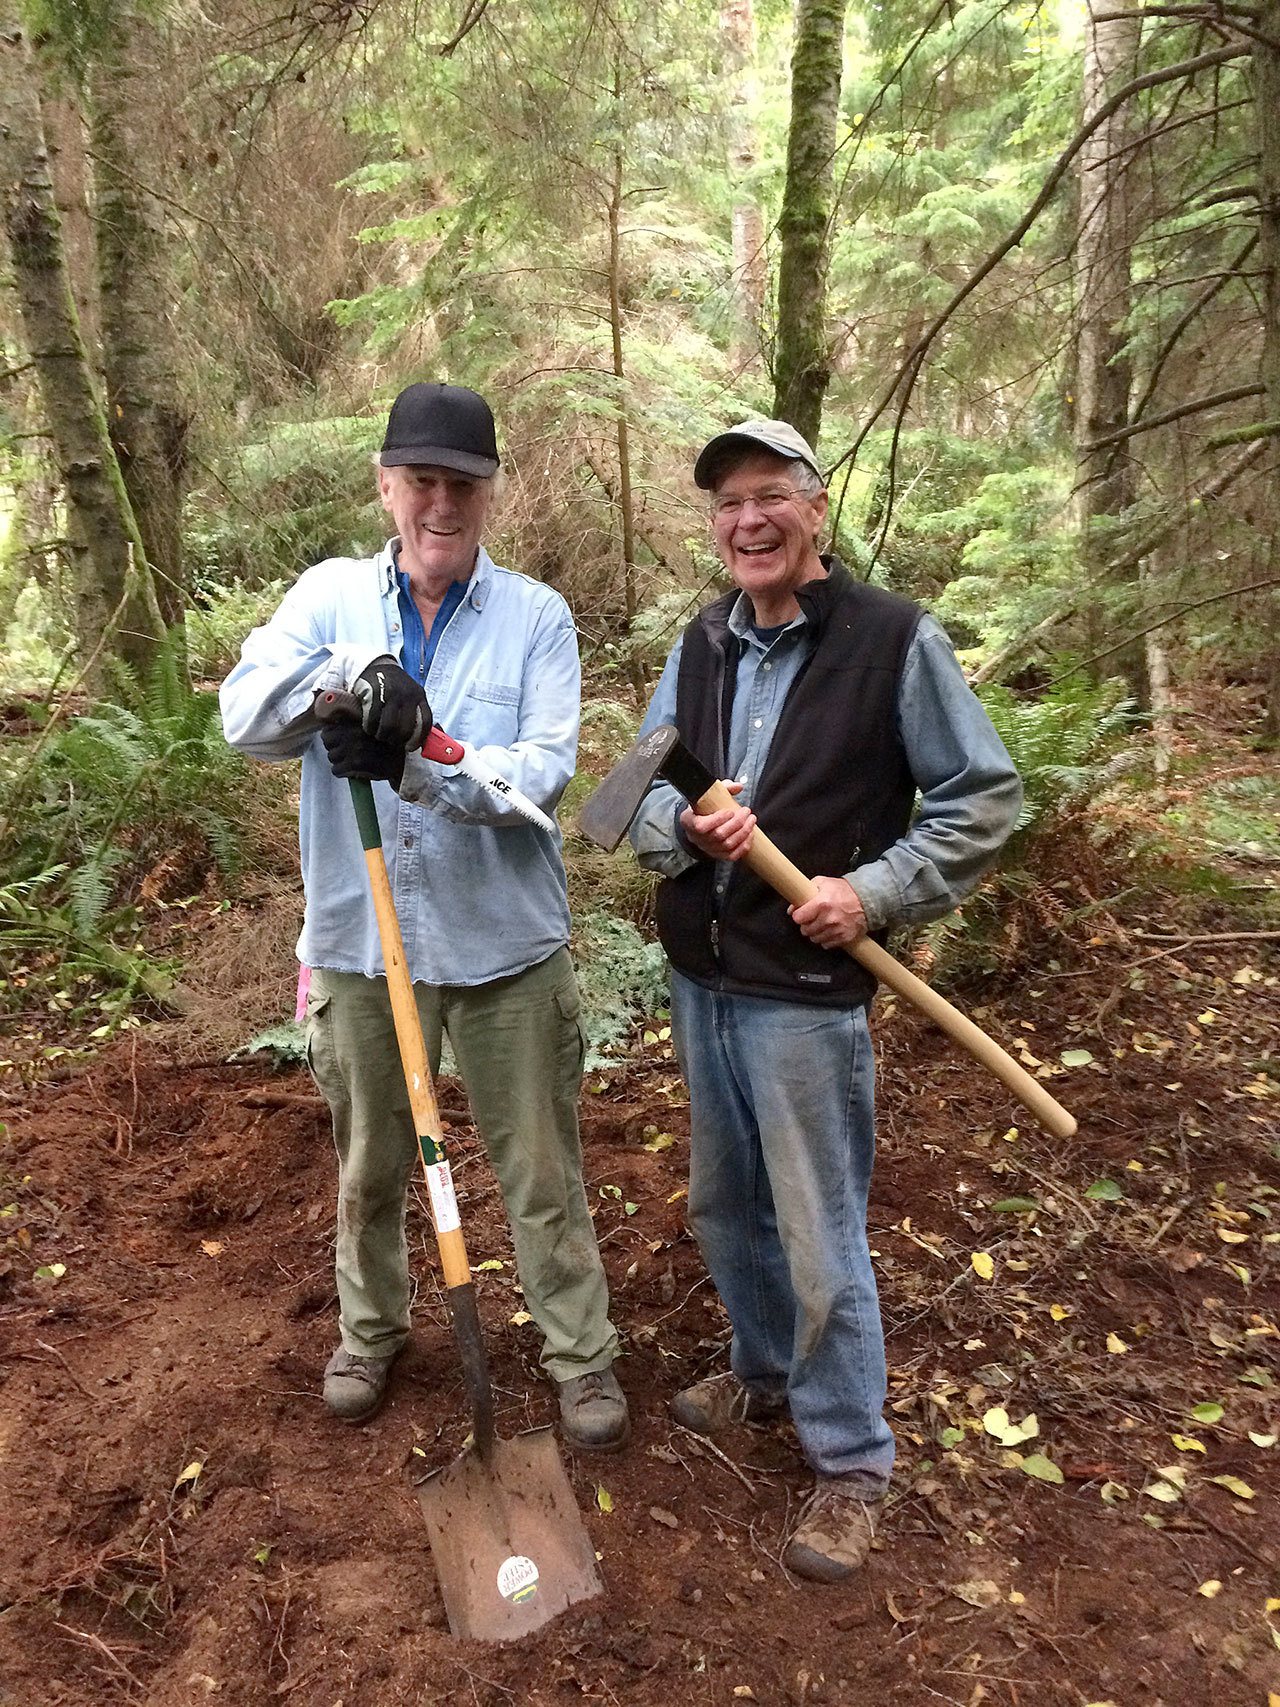 Contributed photo Tom Cahill (left) and John Barney (right) participated in a Whidbey Camano Land Trust trail-building work party at Trillium Community Forest on Friday, Sept. 23.